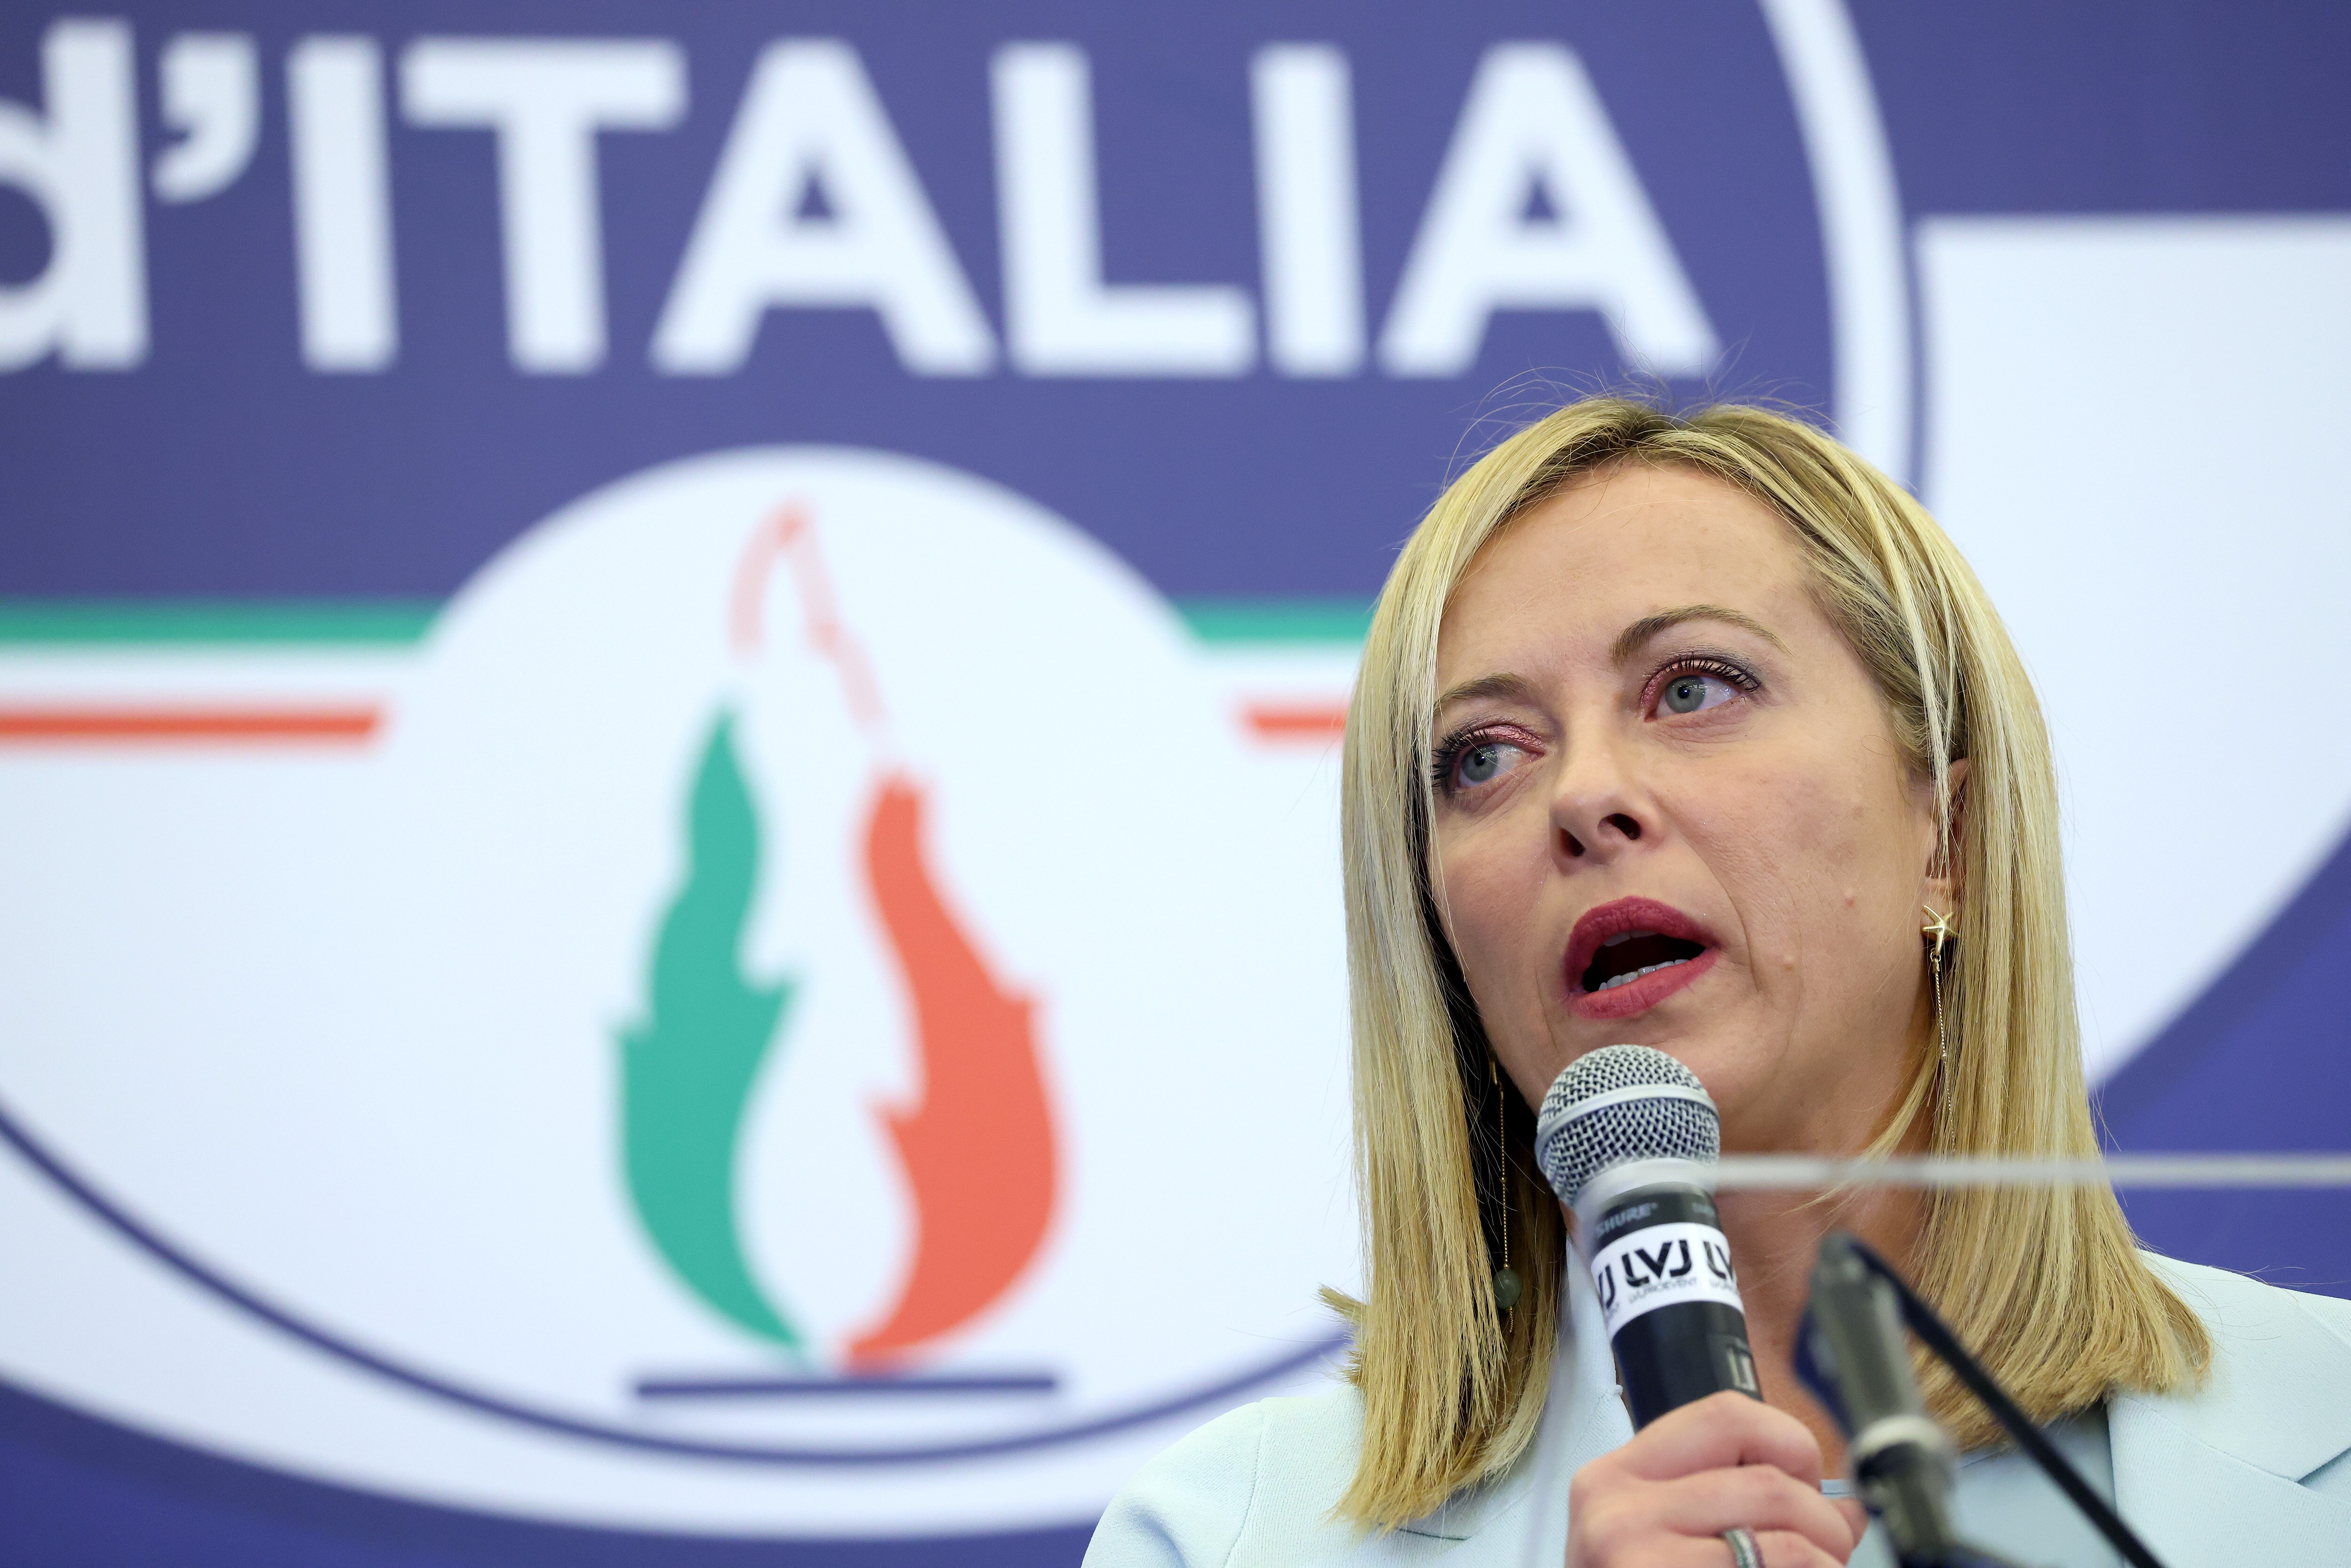 France, Sweden and now Italy — the nationalist backlash in Europe